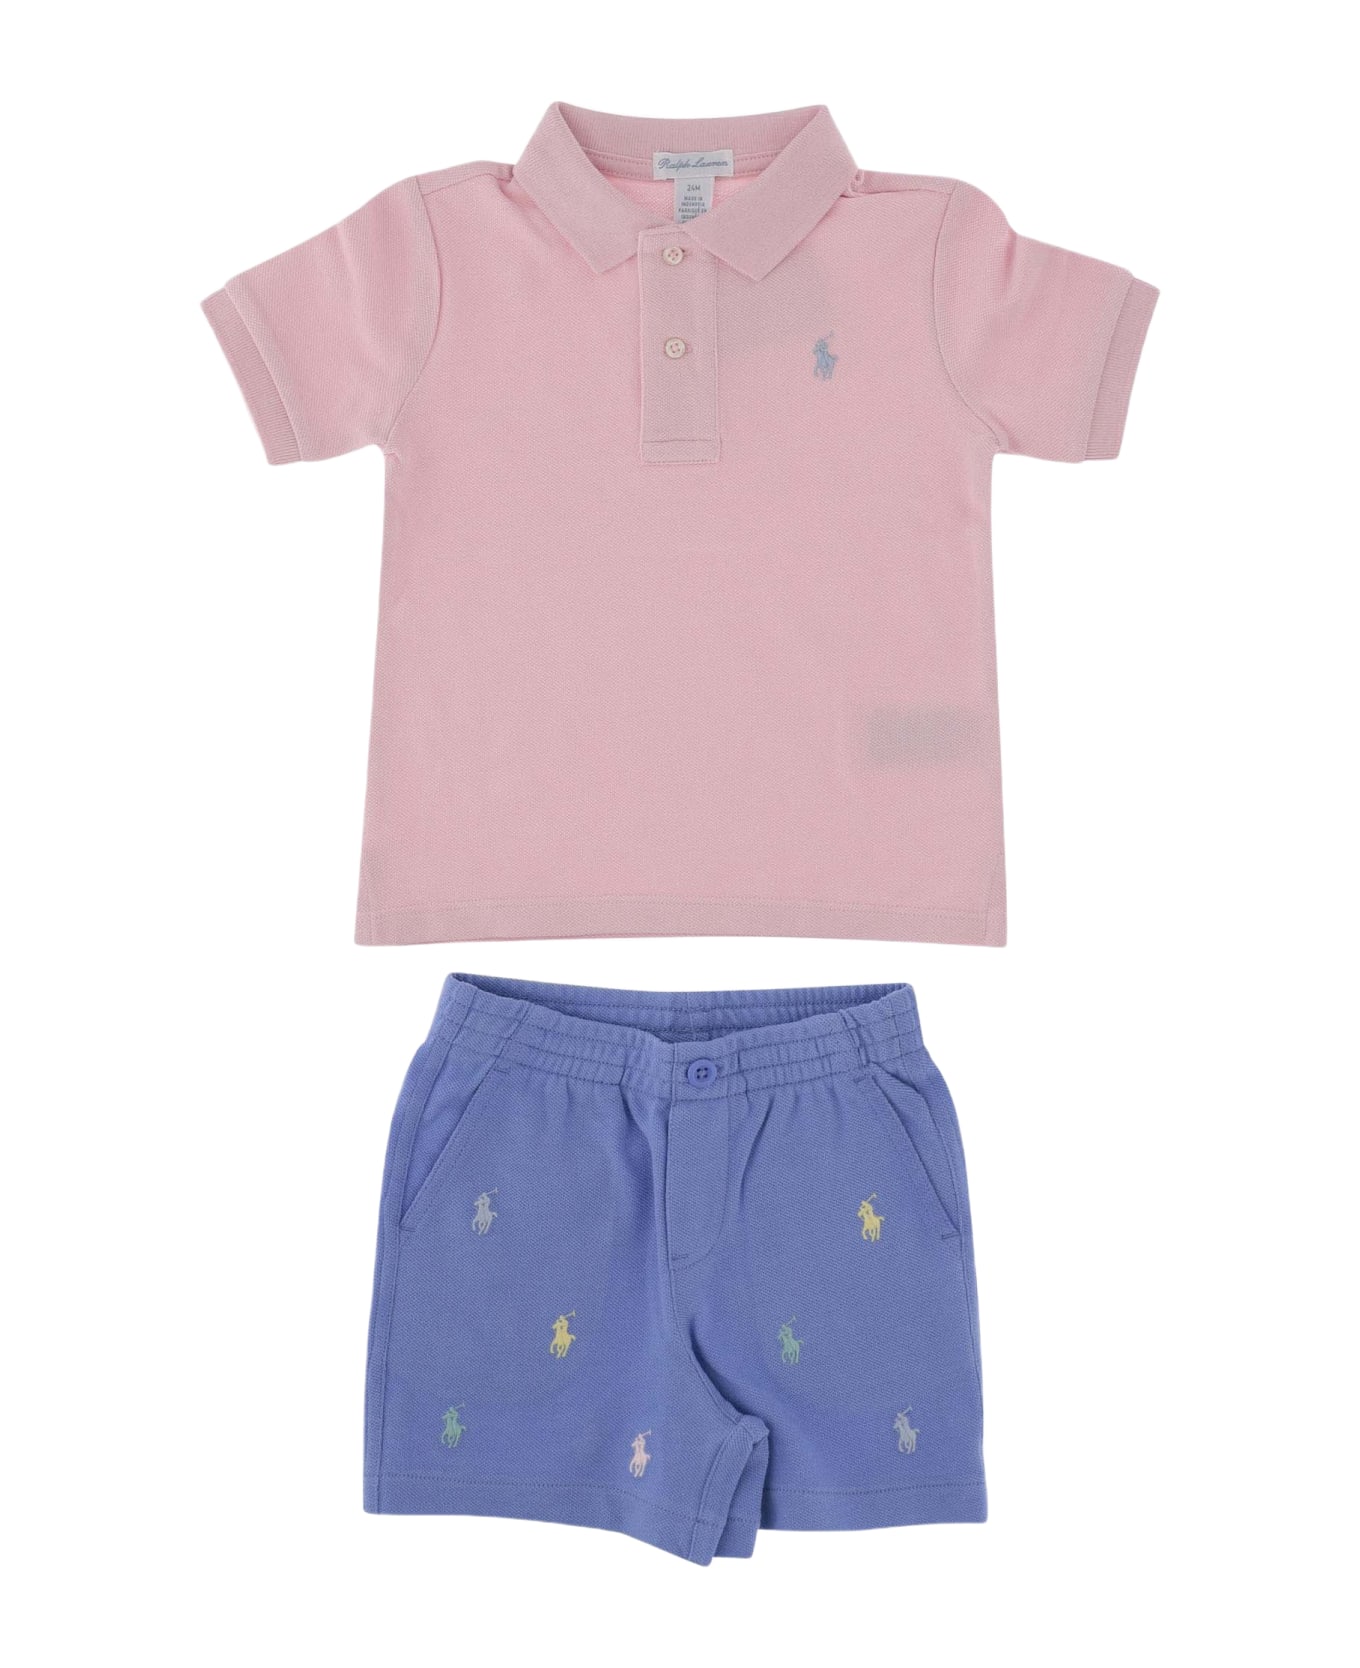 Polo Ralph Lauren Two-piece Outfit Set - Red ボディスーツ＆セットアップ